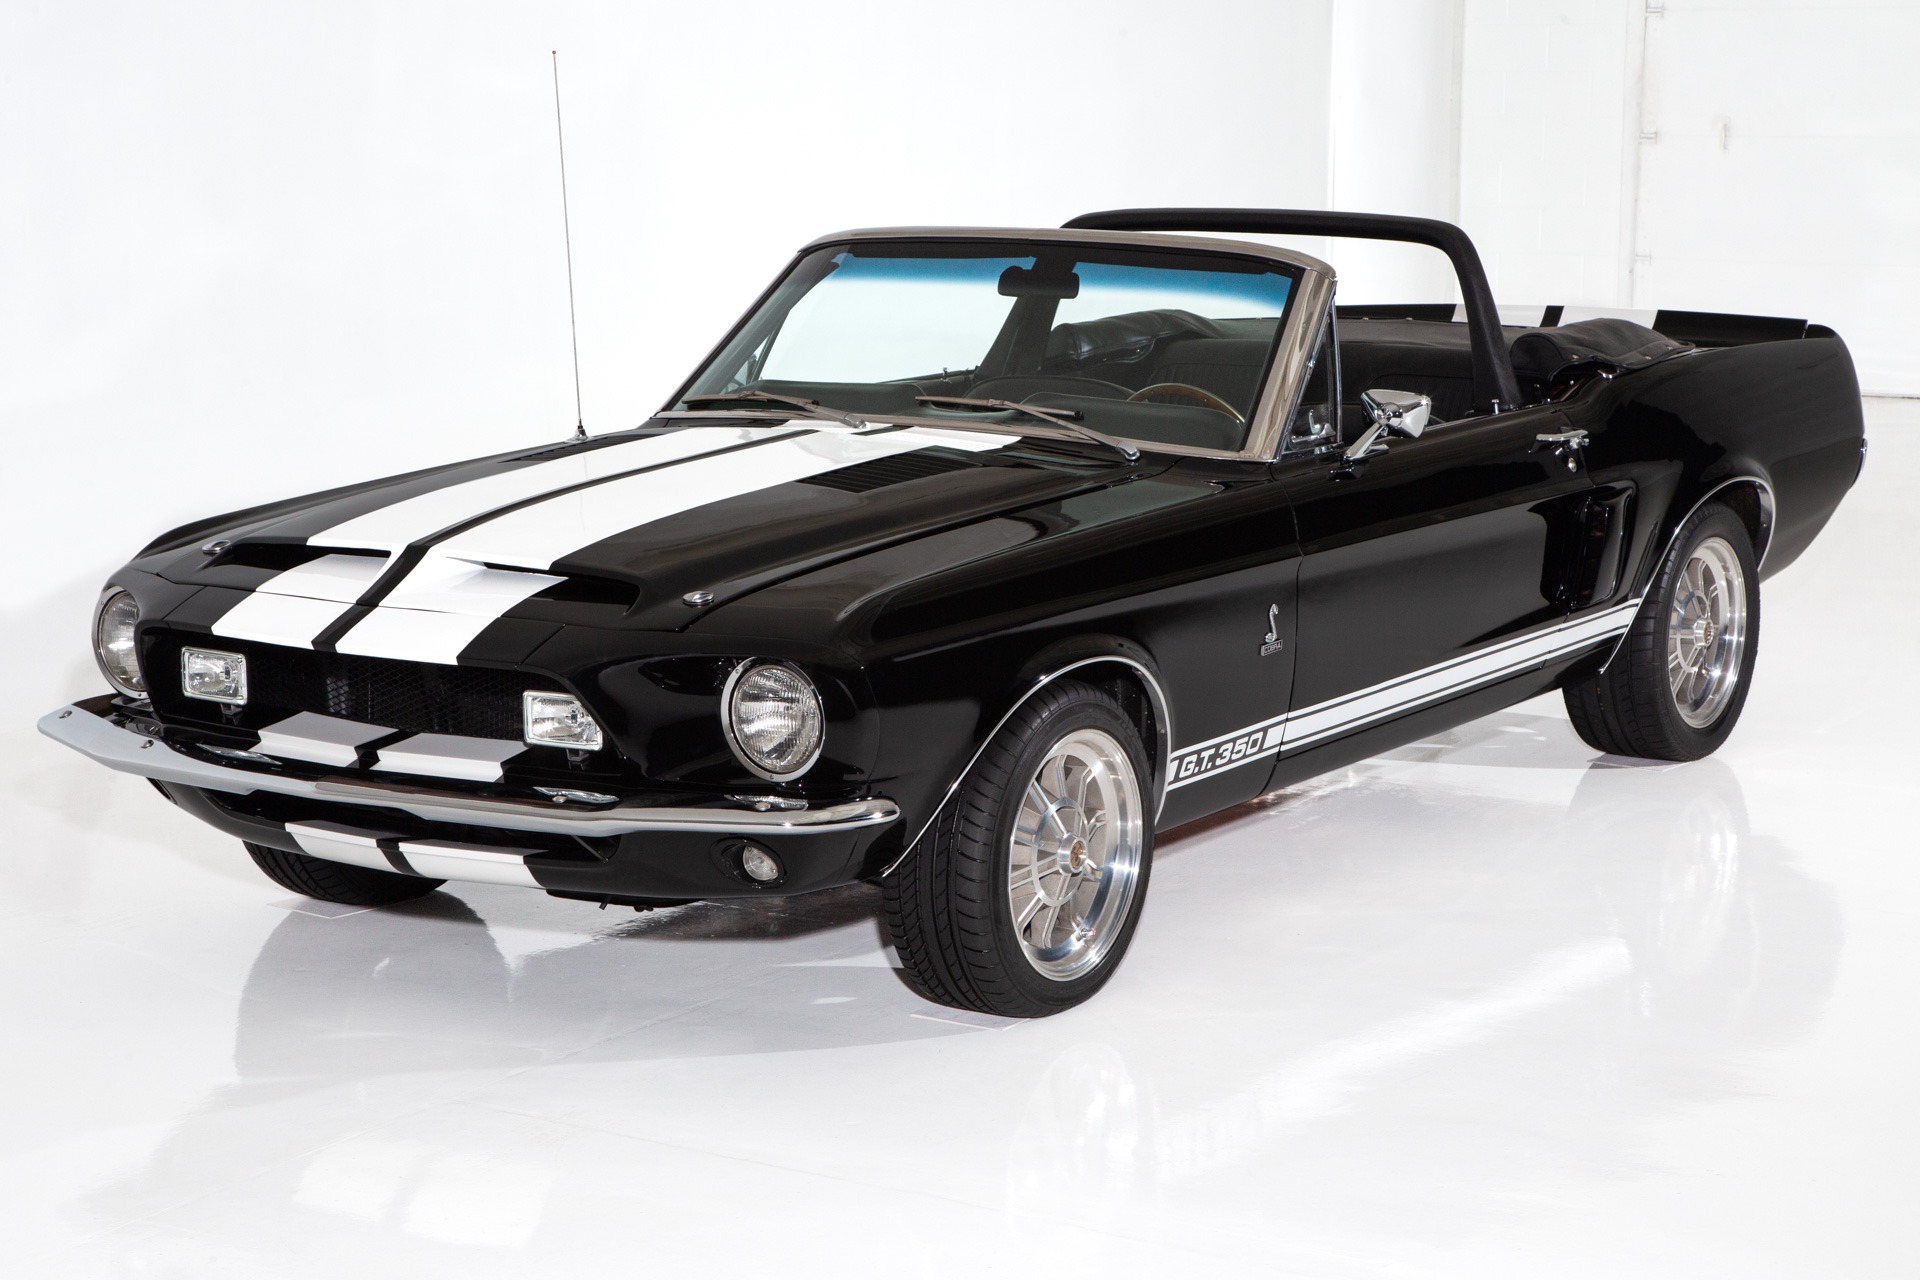 1967 Ford Mustang 